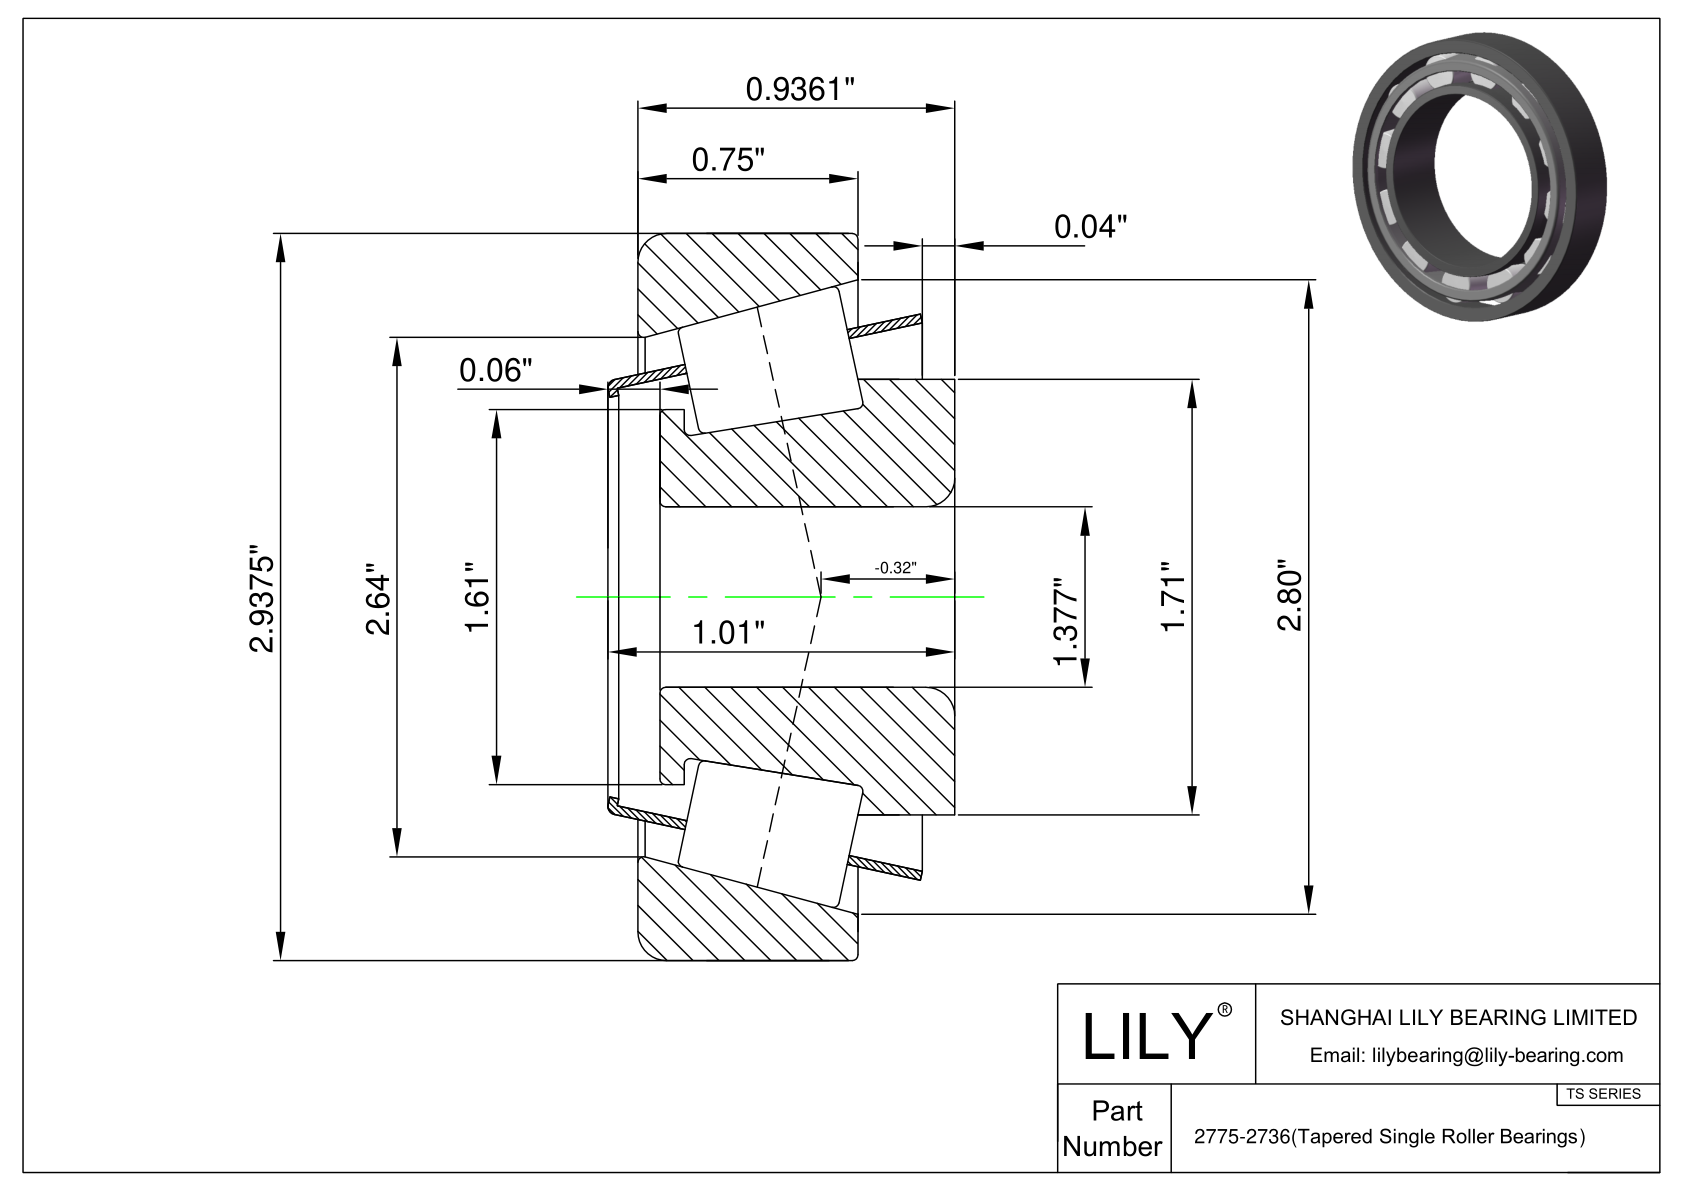 2775-2736 TS (Tapered Single Roller Bearings) (Imperial) cad drawing